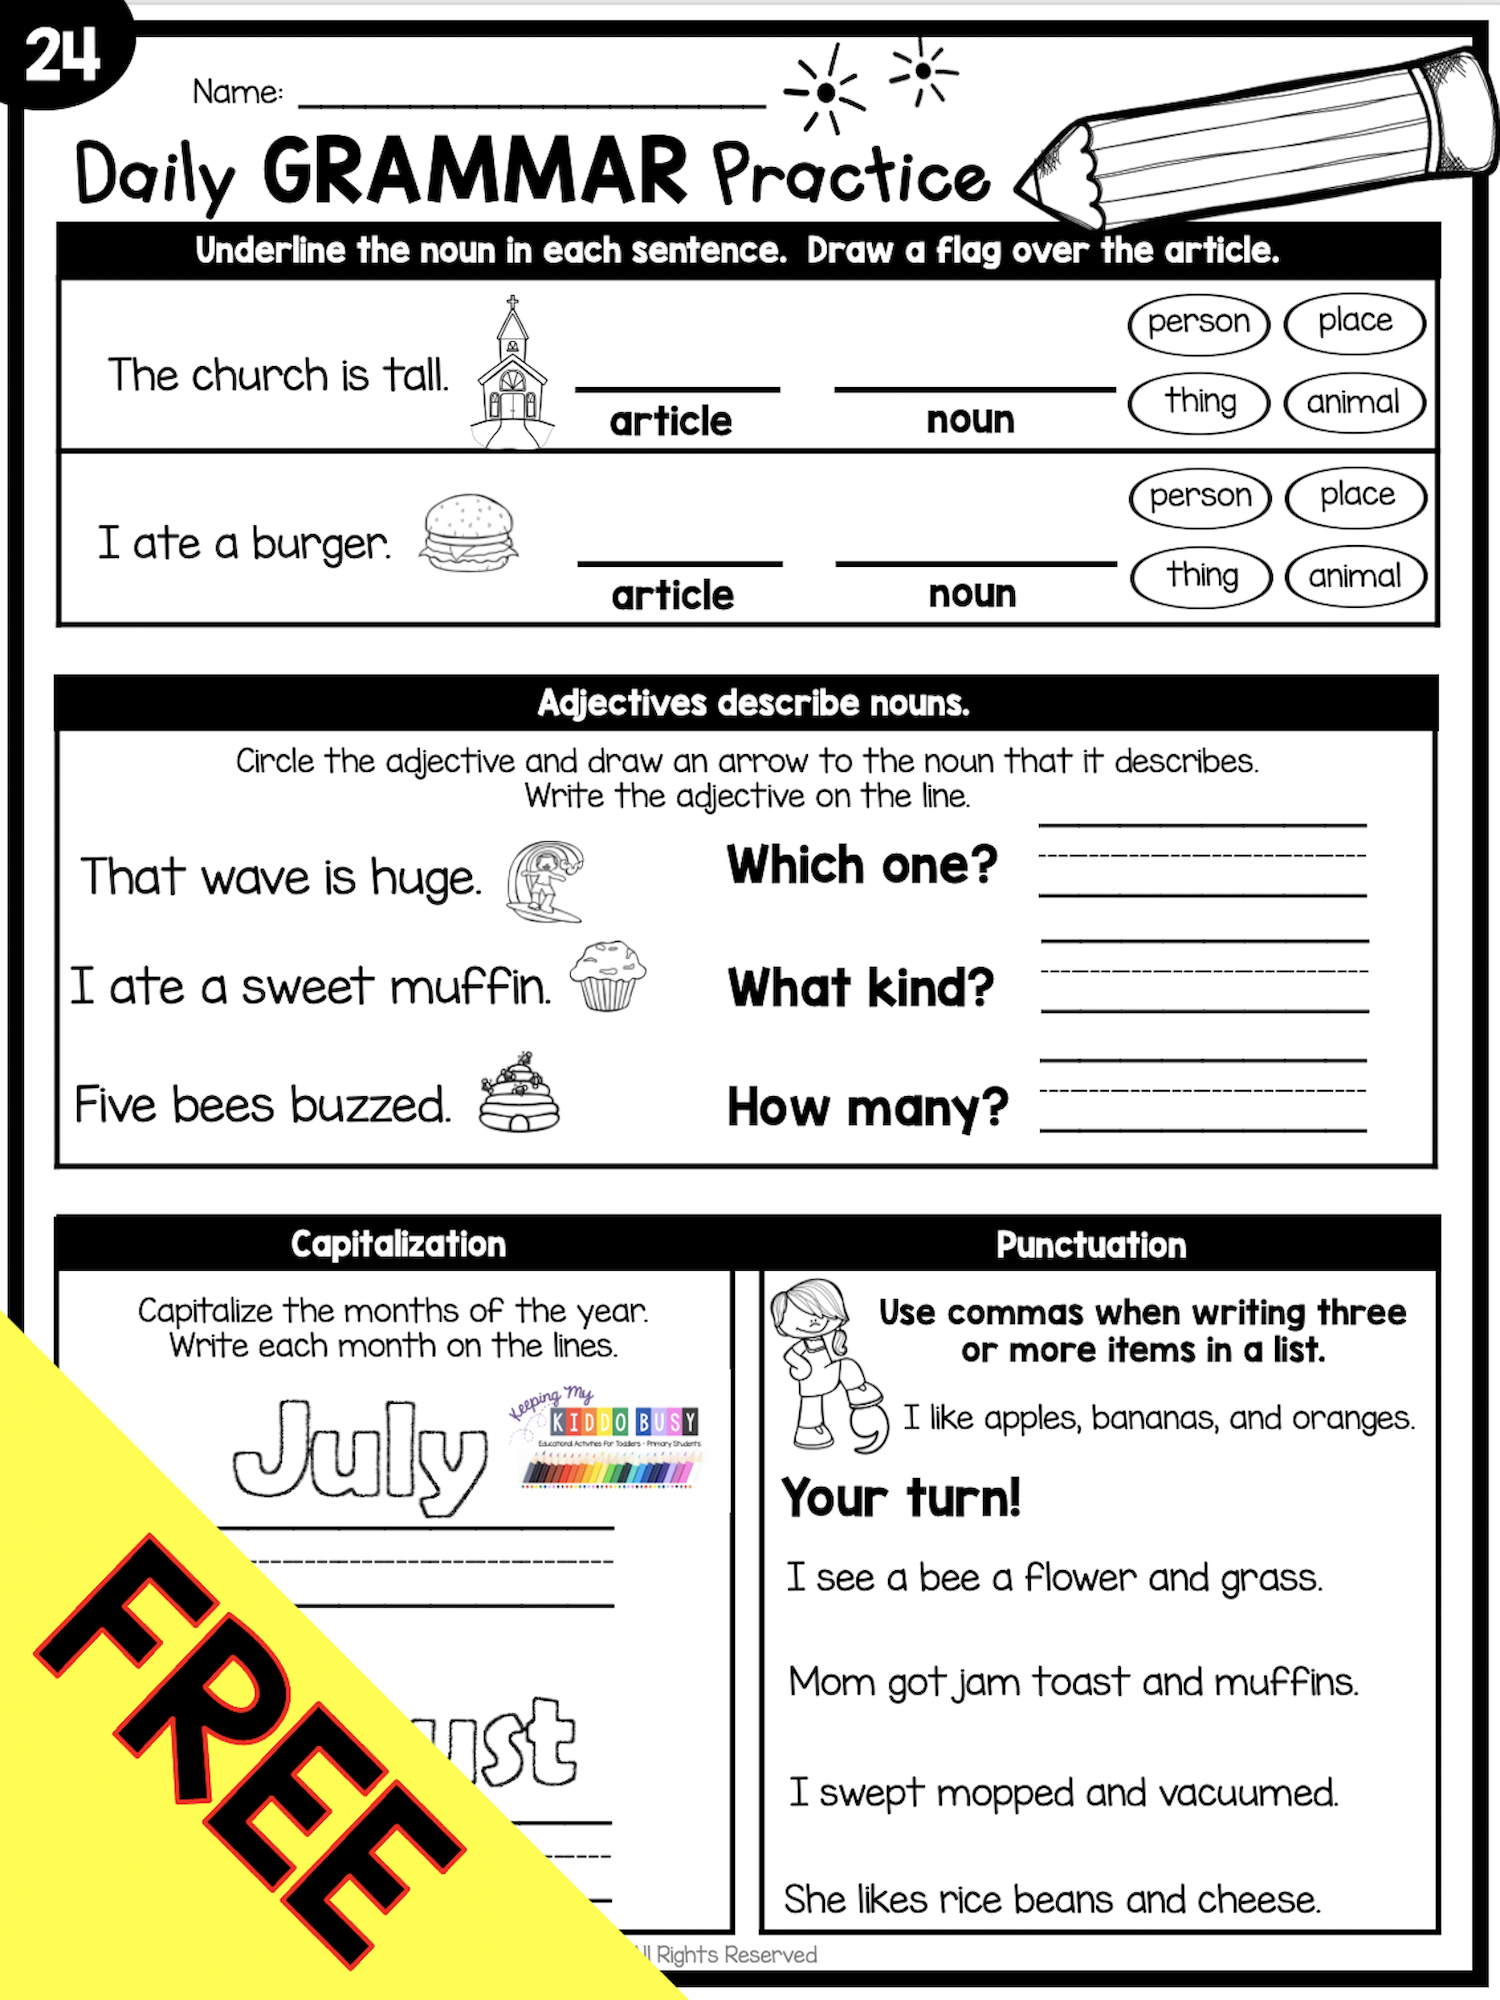 Free Daily Grammar Worksheets And Daily Review | Essay Writing within Daily Language Review Grade 5 Free Printable